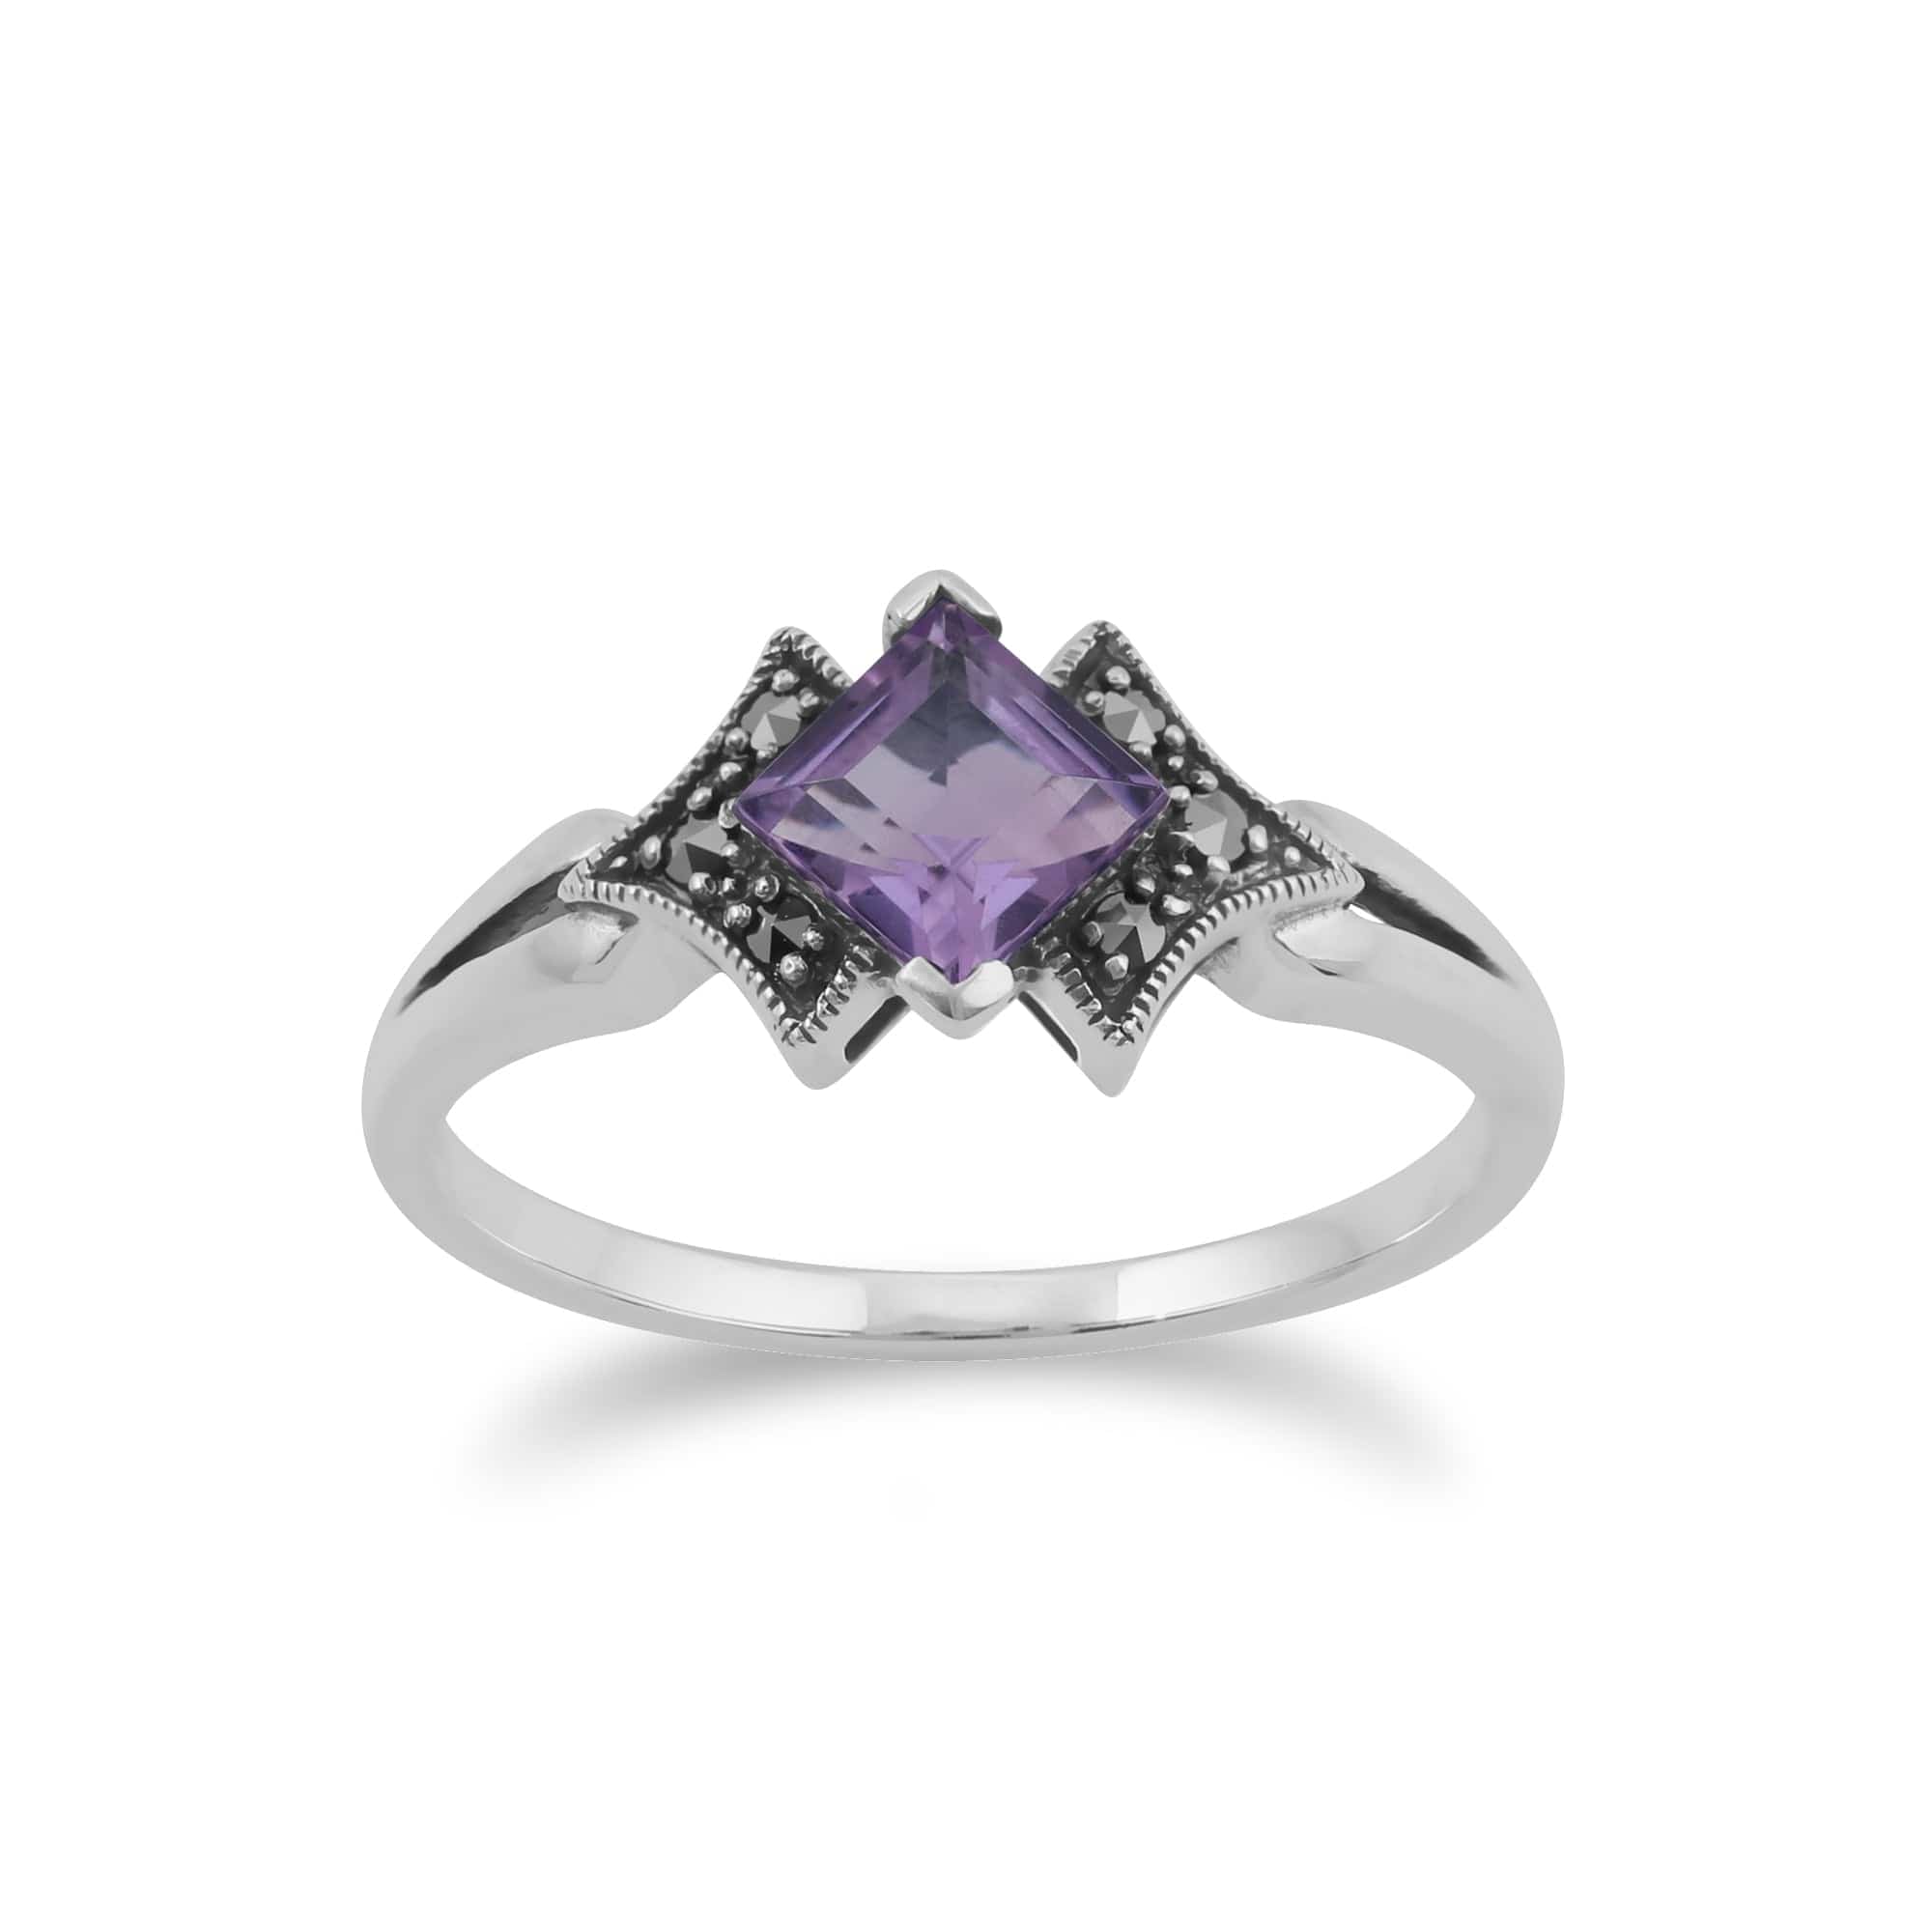 Art Deco Style Square Amethyst & Marcasite Ring in 925 Sterling Silver - Gemondo